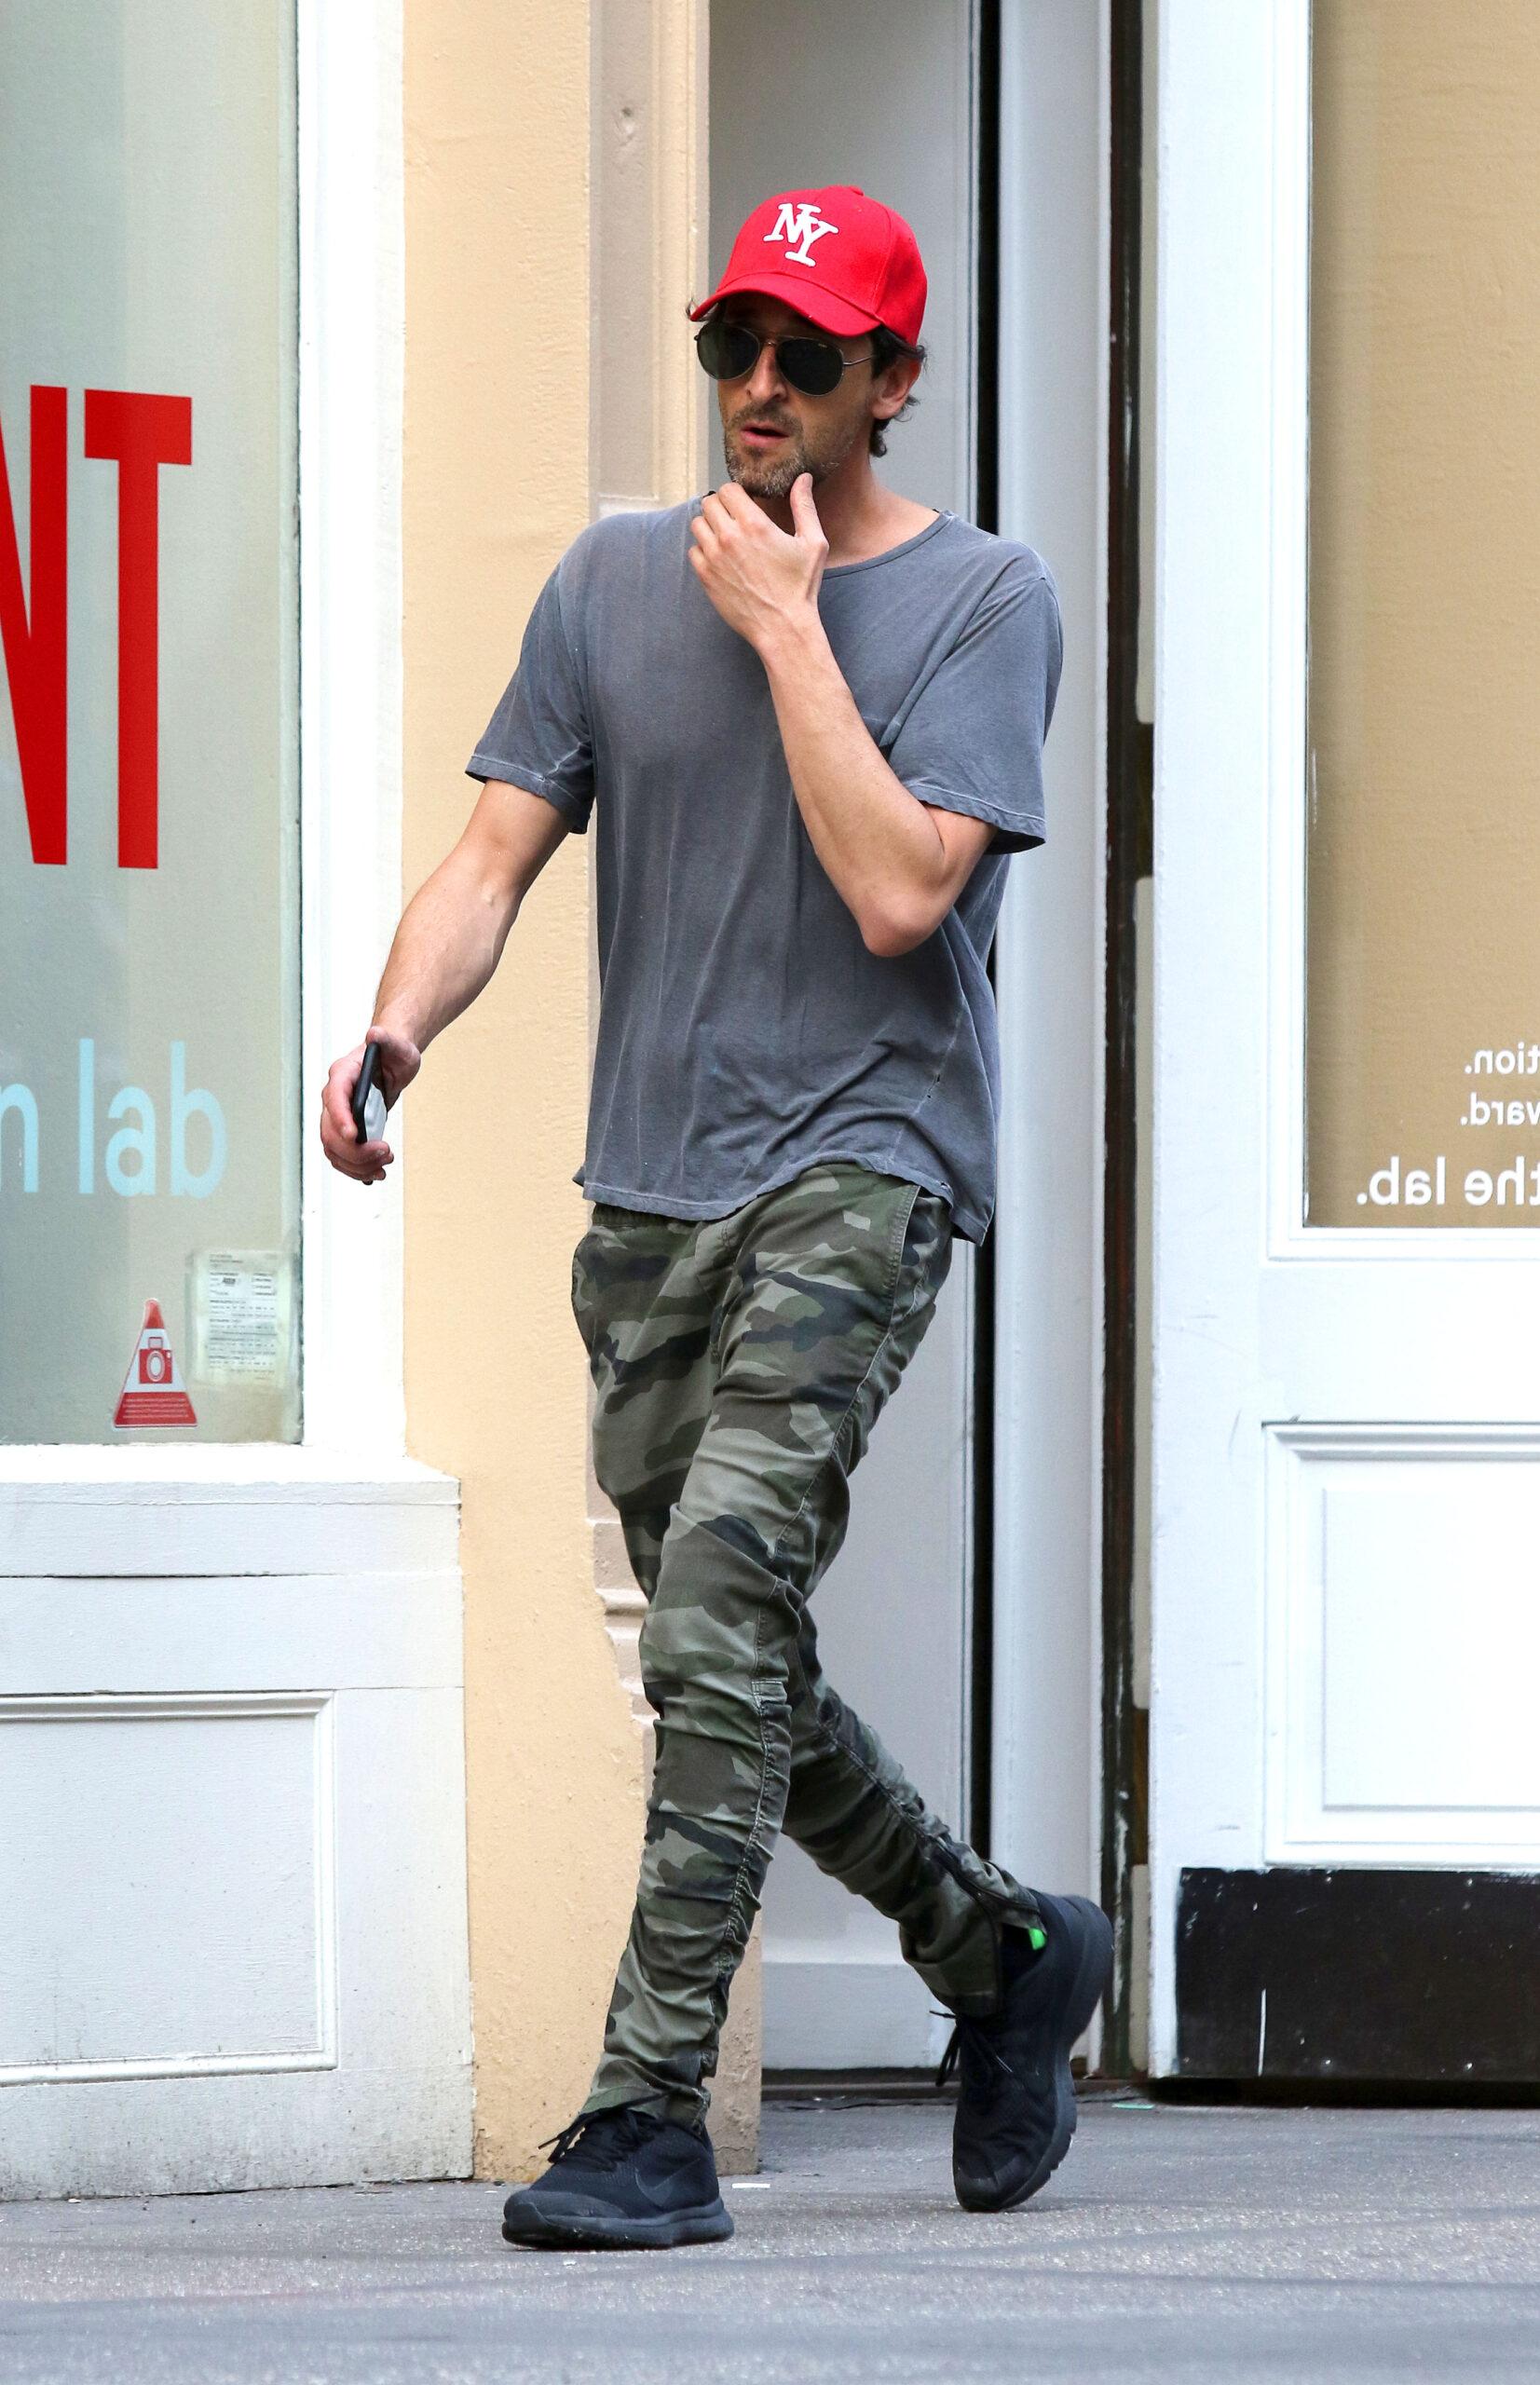 Adrien Brody goes out for a walk in New York City.